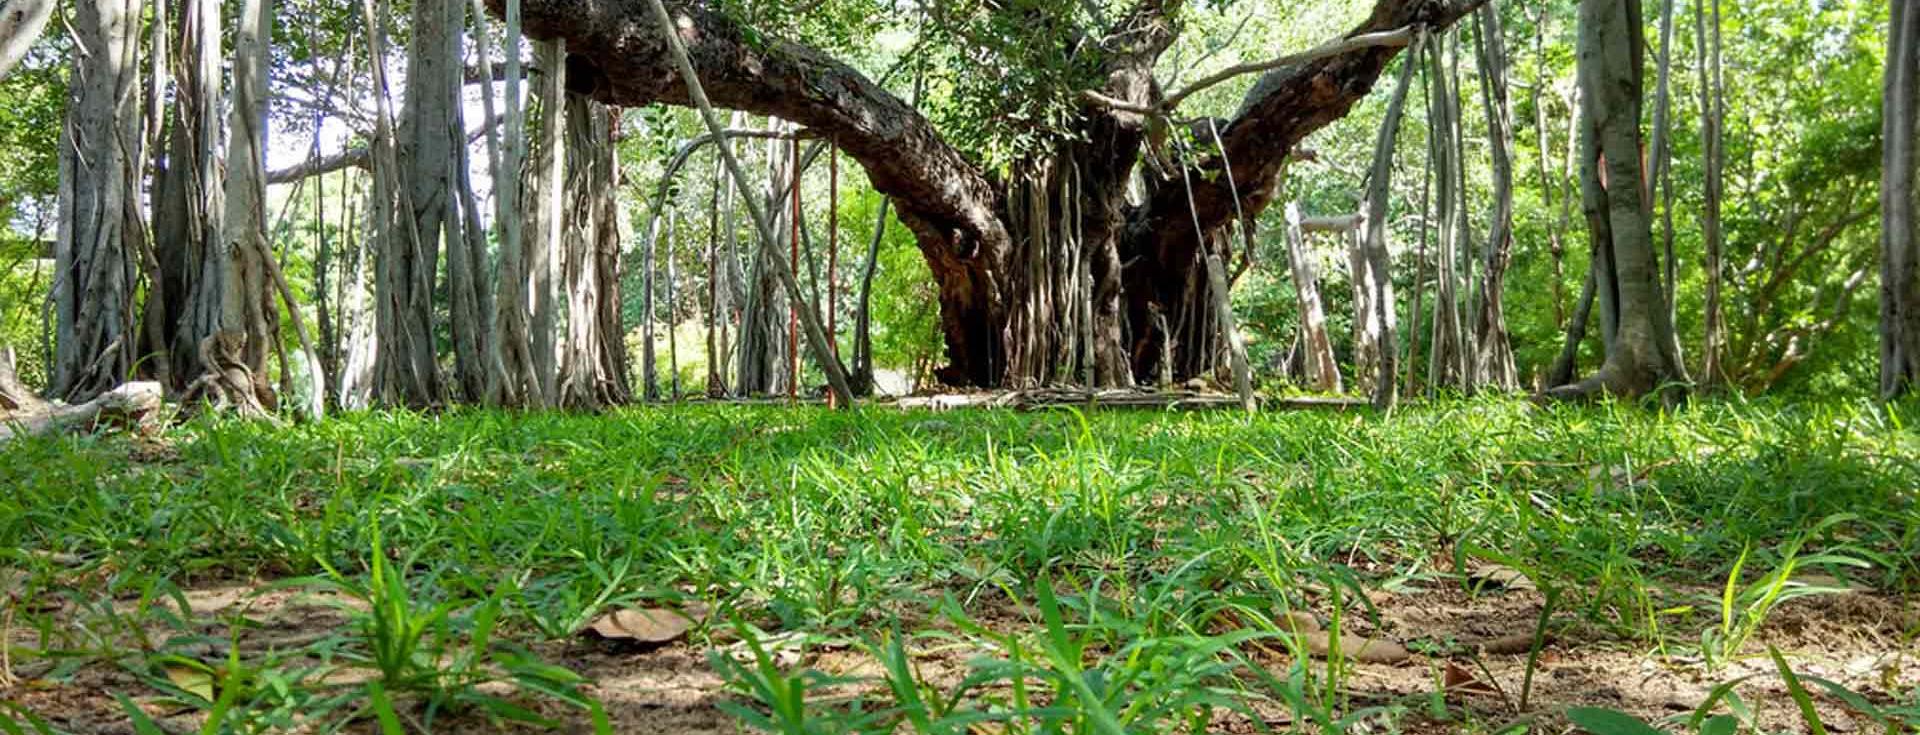 5 wildlife sanctuaries that you must not miss when in Chennai